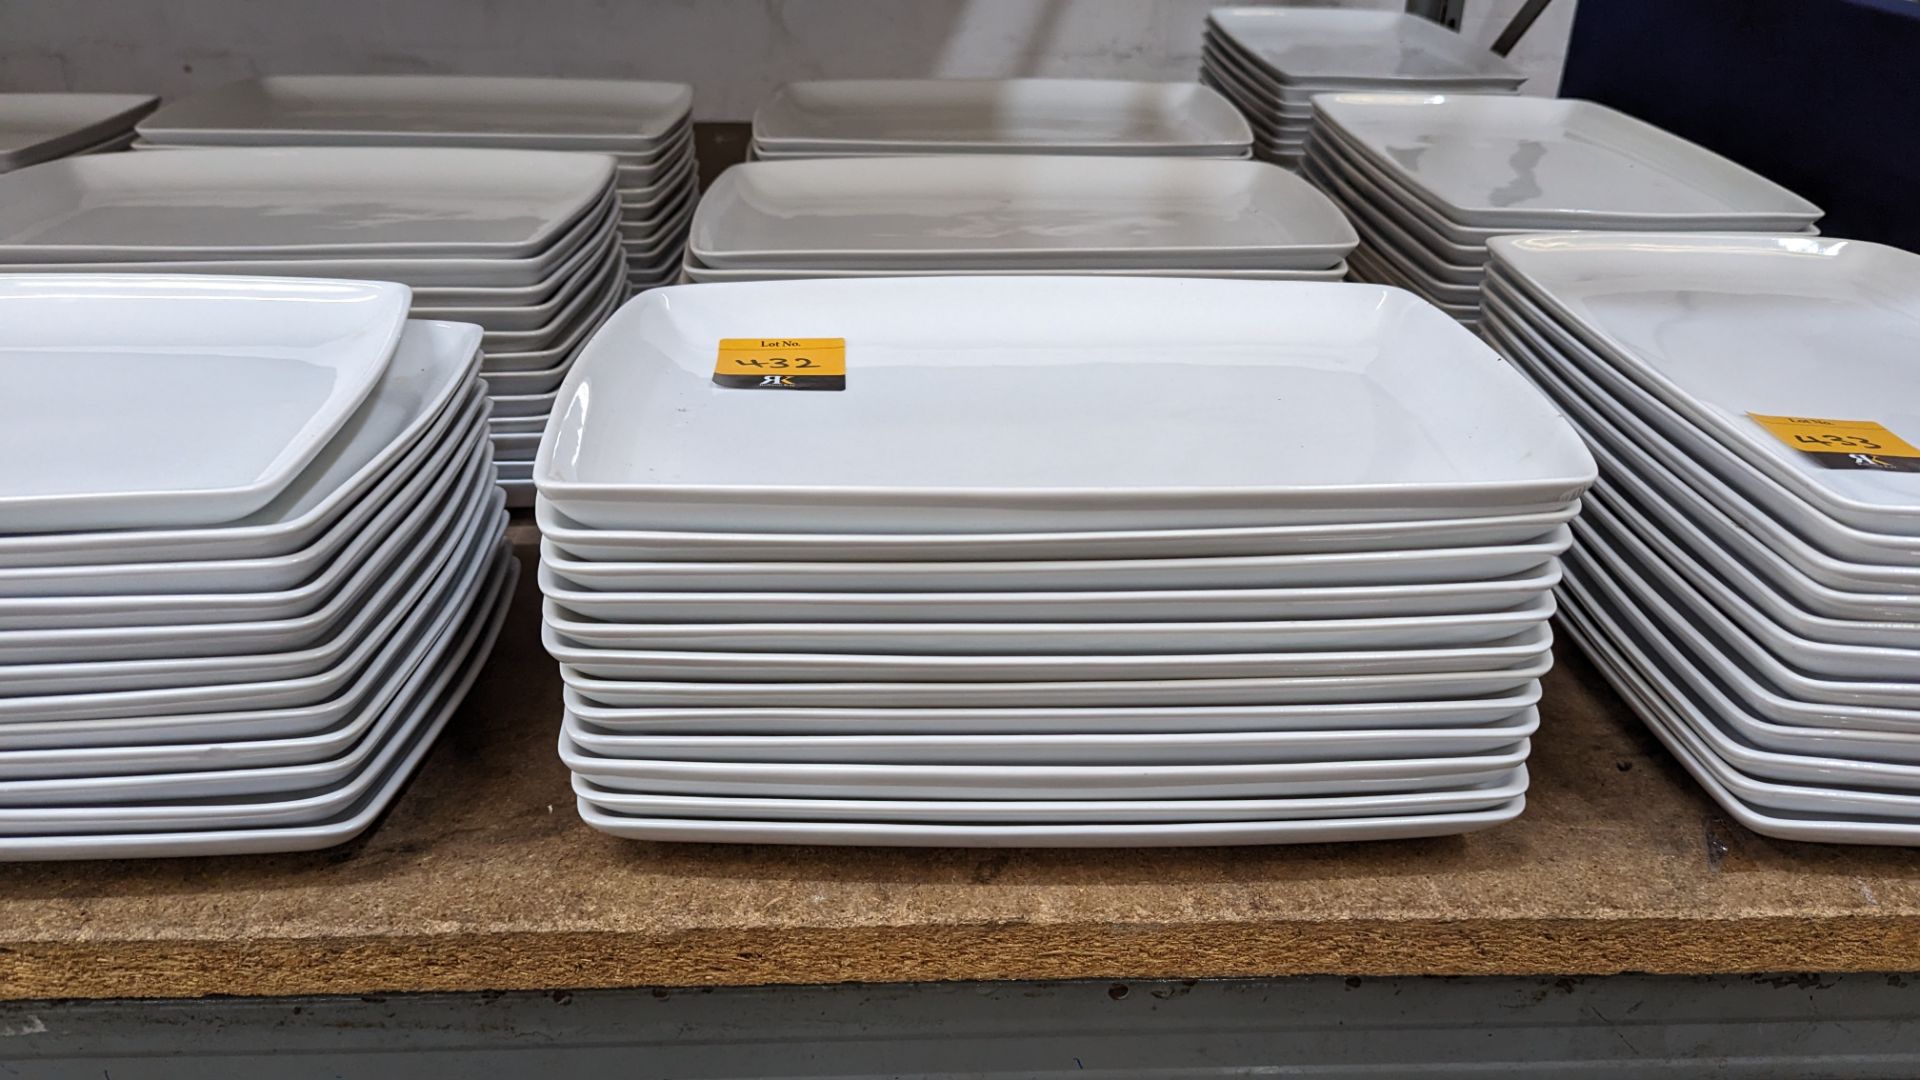 36 off white rectangular plates/small platters each measuring approximately 325mm x 210mm - 3 stacks